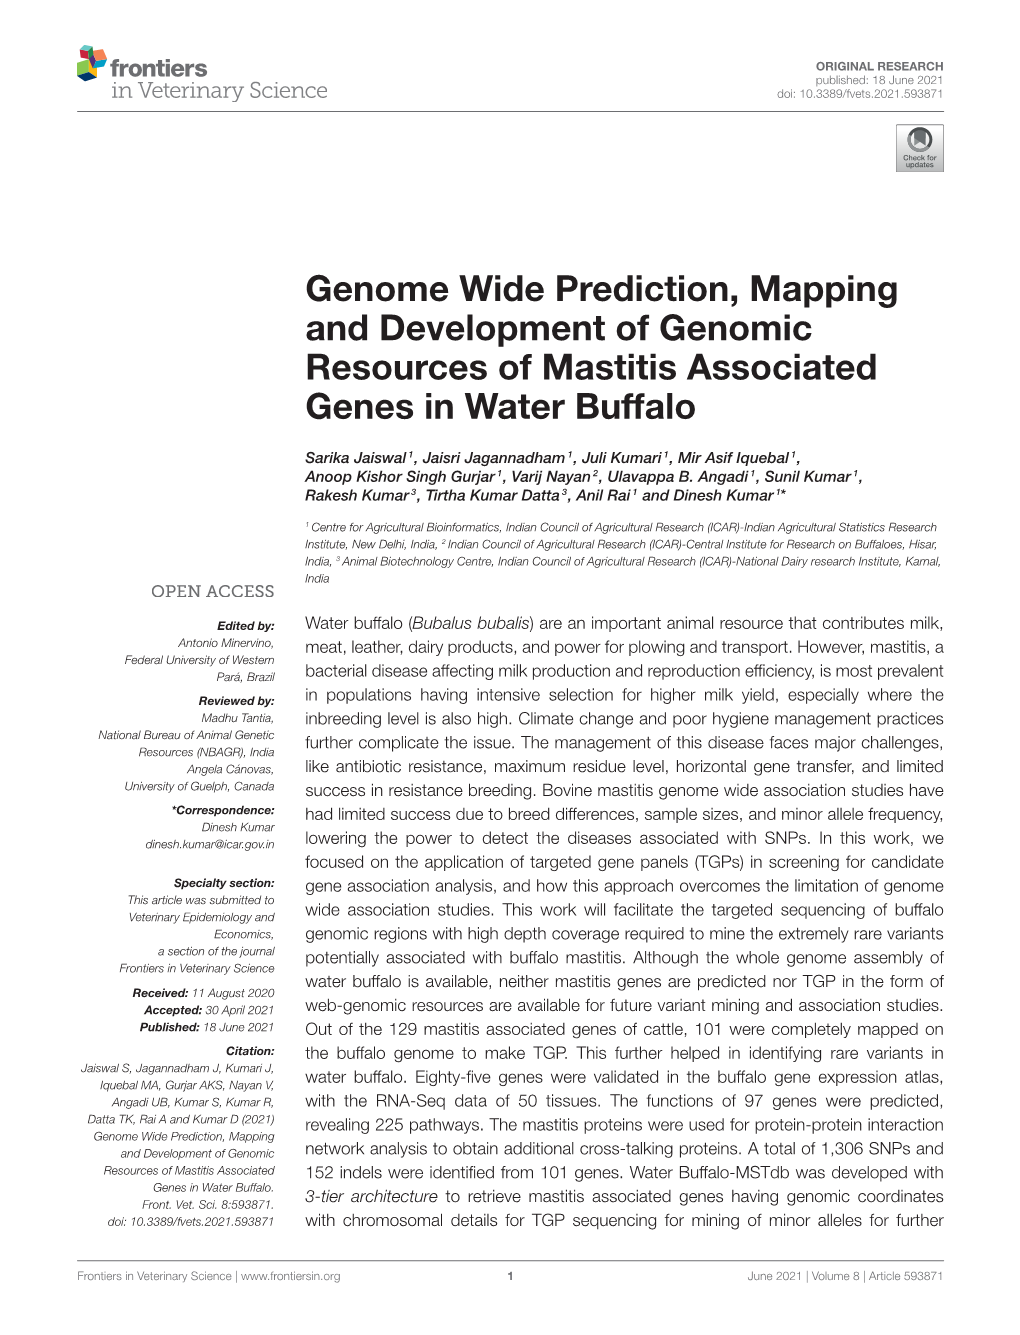 Genome Wide Prediction, Mapping and Development of Genomic Resources of Mastitis Associated Genes in Water Buffalo